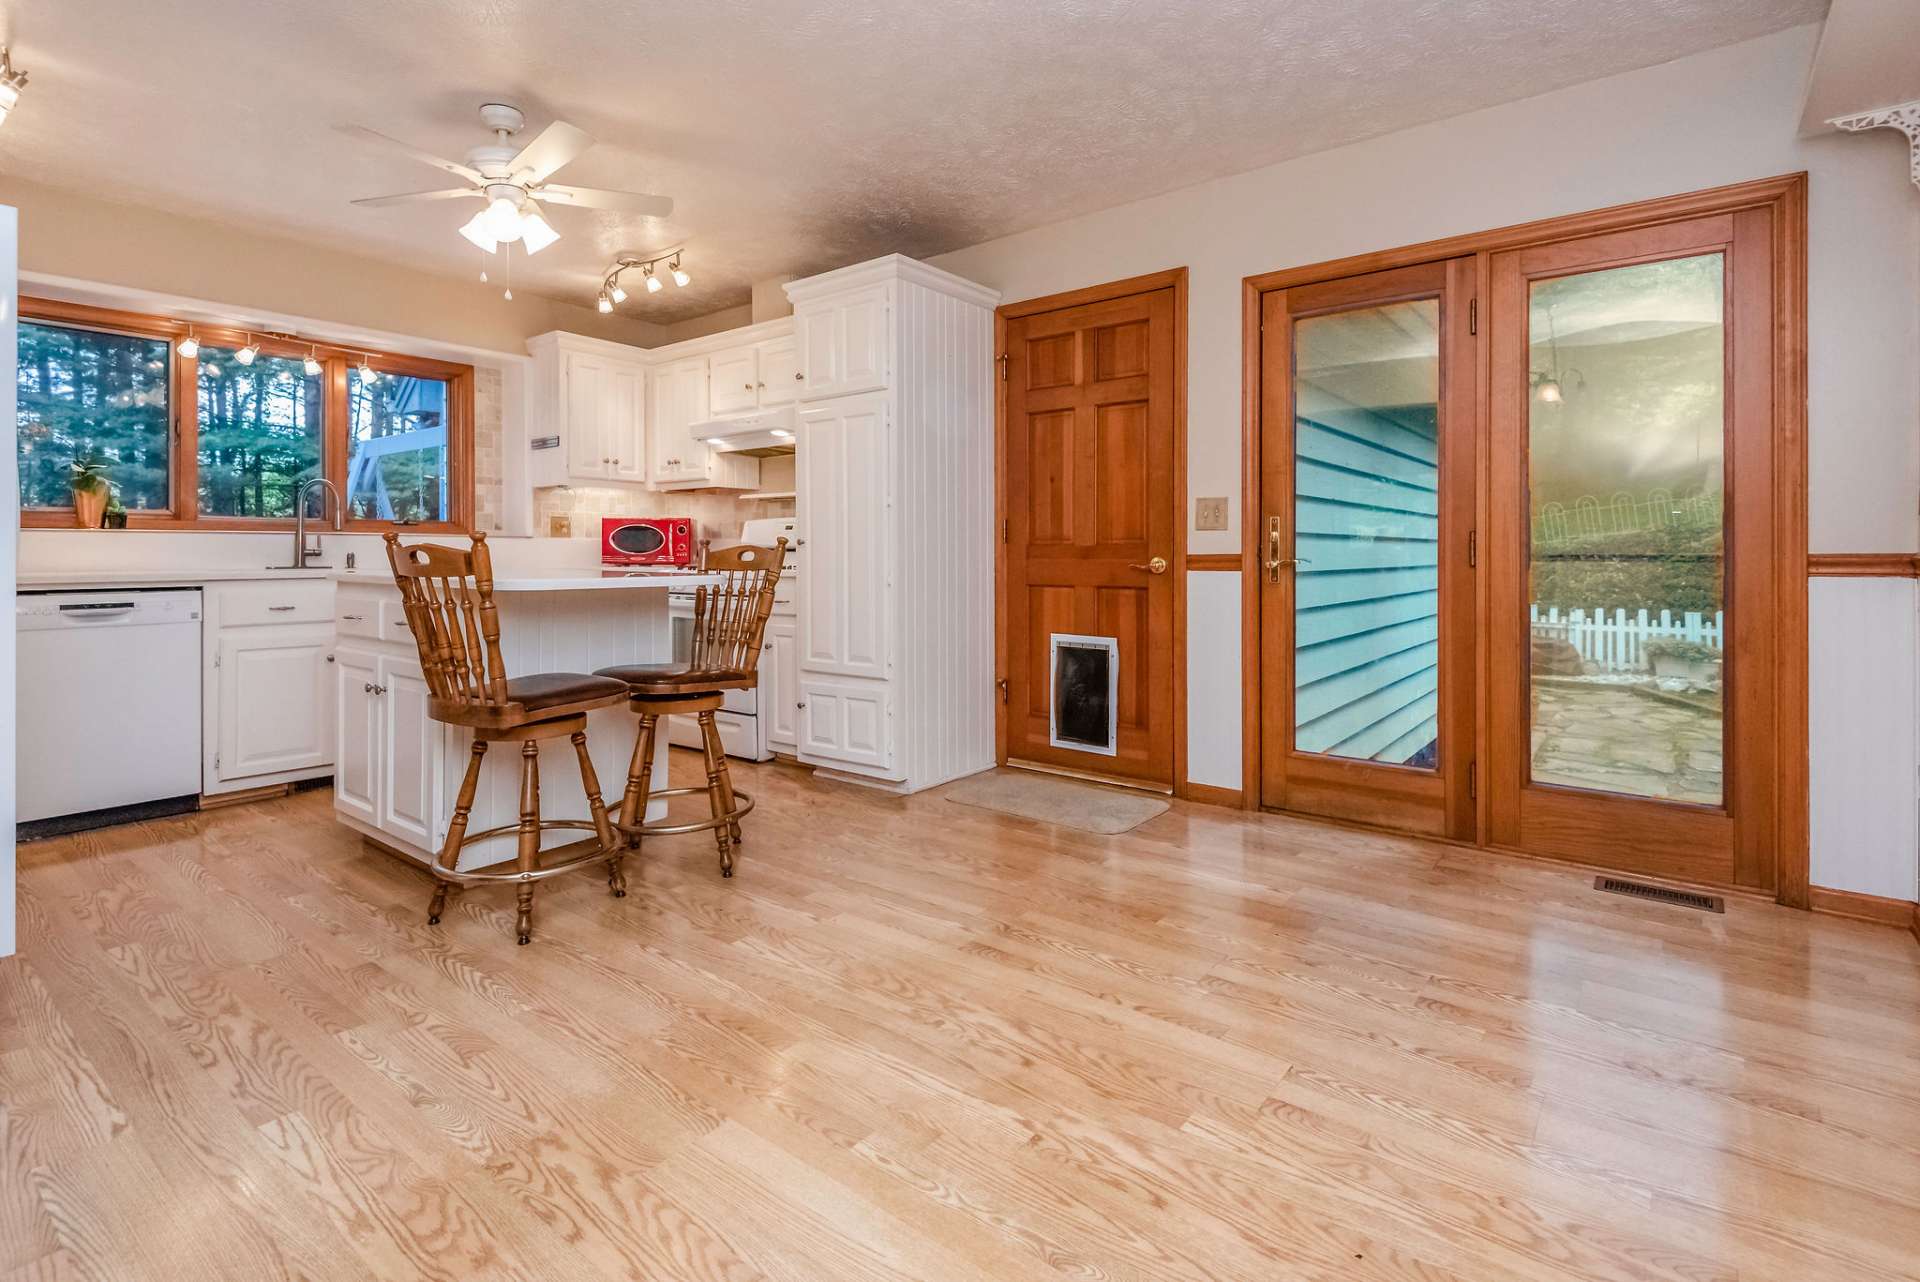 Spacious kitchen and dining area with french doors leading to the back yard and entry to/from the garage.